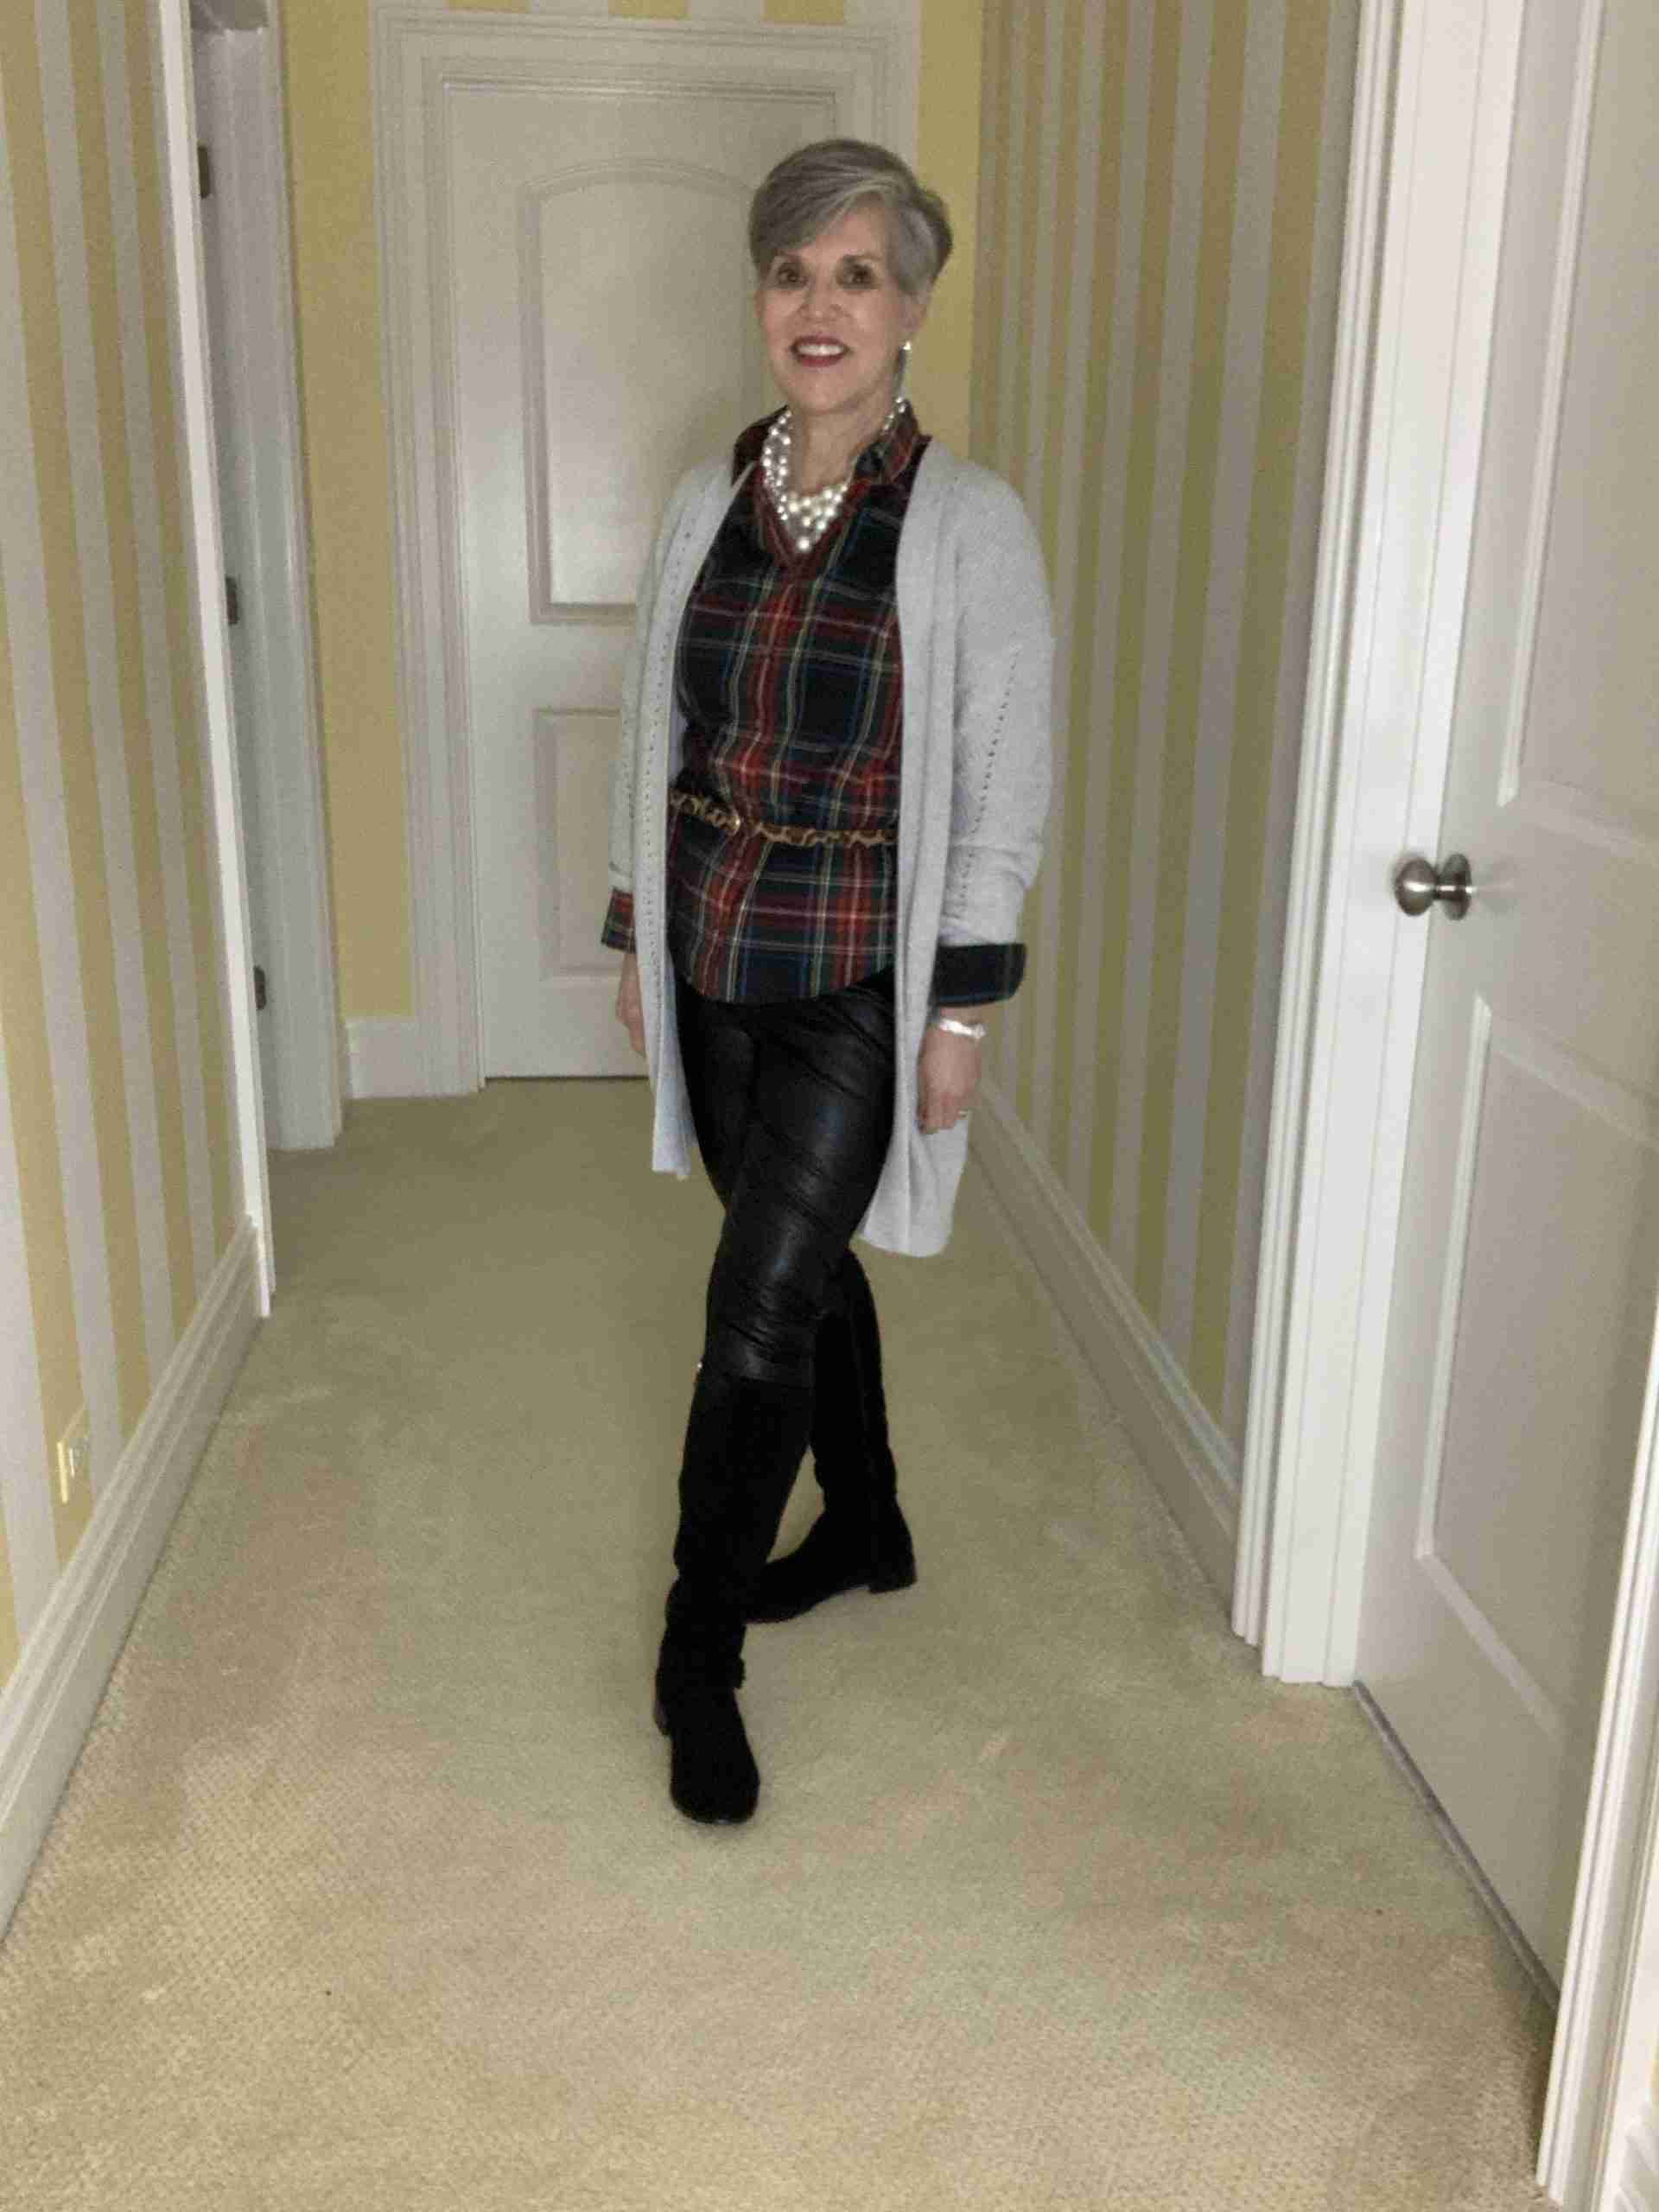 First of three plaid shirt outfits: Soft gray cardigan over a plaid shirt with a chunky pearl choker and leopard belt. The pants are vegan black leather and pointer leggings with suede boots.